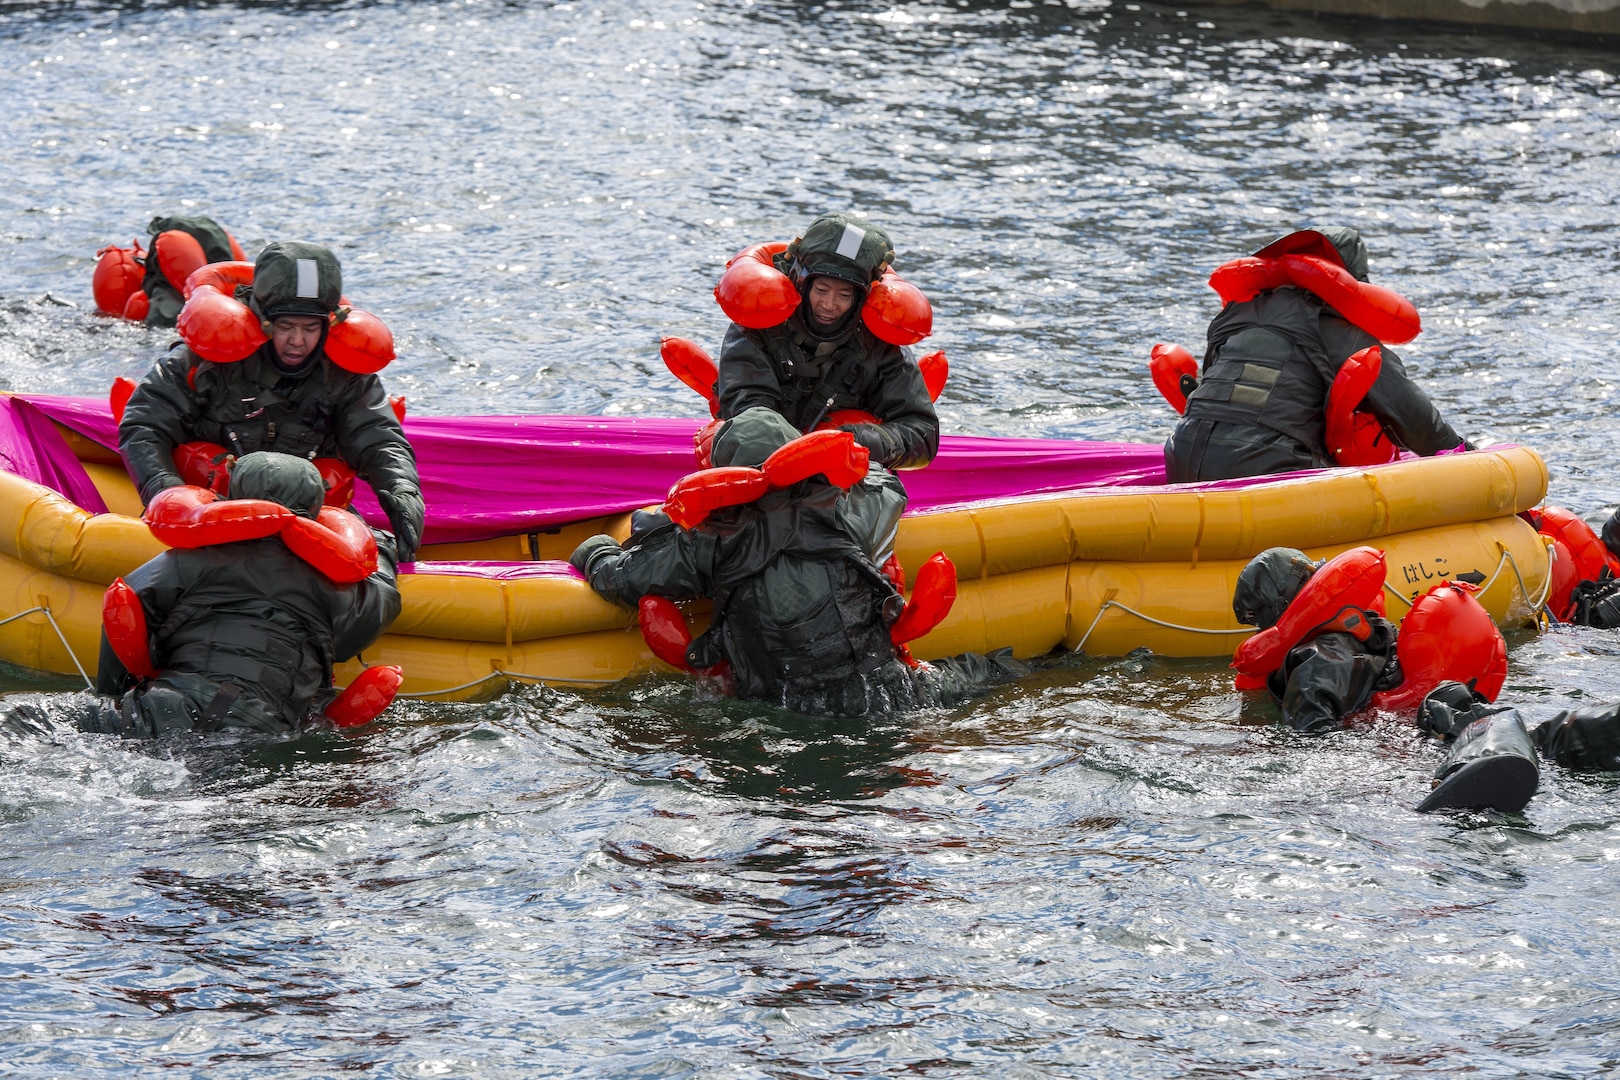 Japan Maritime Self-Defense Force aviators assist each other in boarding an inflatable raft during Winter Survival Training at Marine Corps Air Station Iwakuni, Japan, March 9-11, 2016. Mandatory for all aviators and aircrew, the JMSDF conducts this training semi-annually, once in the summer and once in the winter. The final portion consisted of drifting training where the aviators dressed in Taikan Taisui Fuku, a cold and water resistant suit. They jumped into the water, swam to inflatable-life-saving boats and worked as a team to climb aboard. (U.S. Marine Corps photo by Lance Cpl. Aaron Henson/Released)